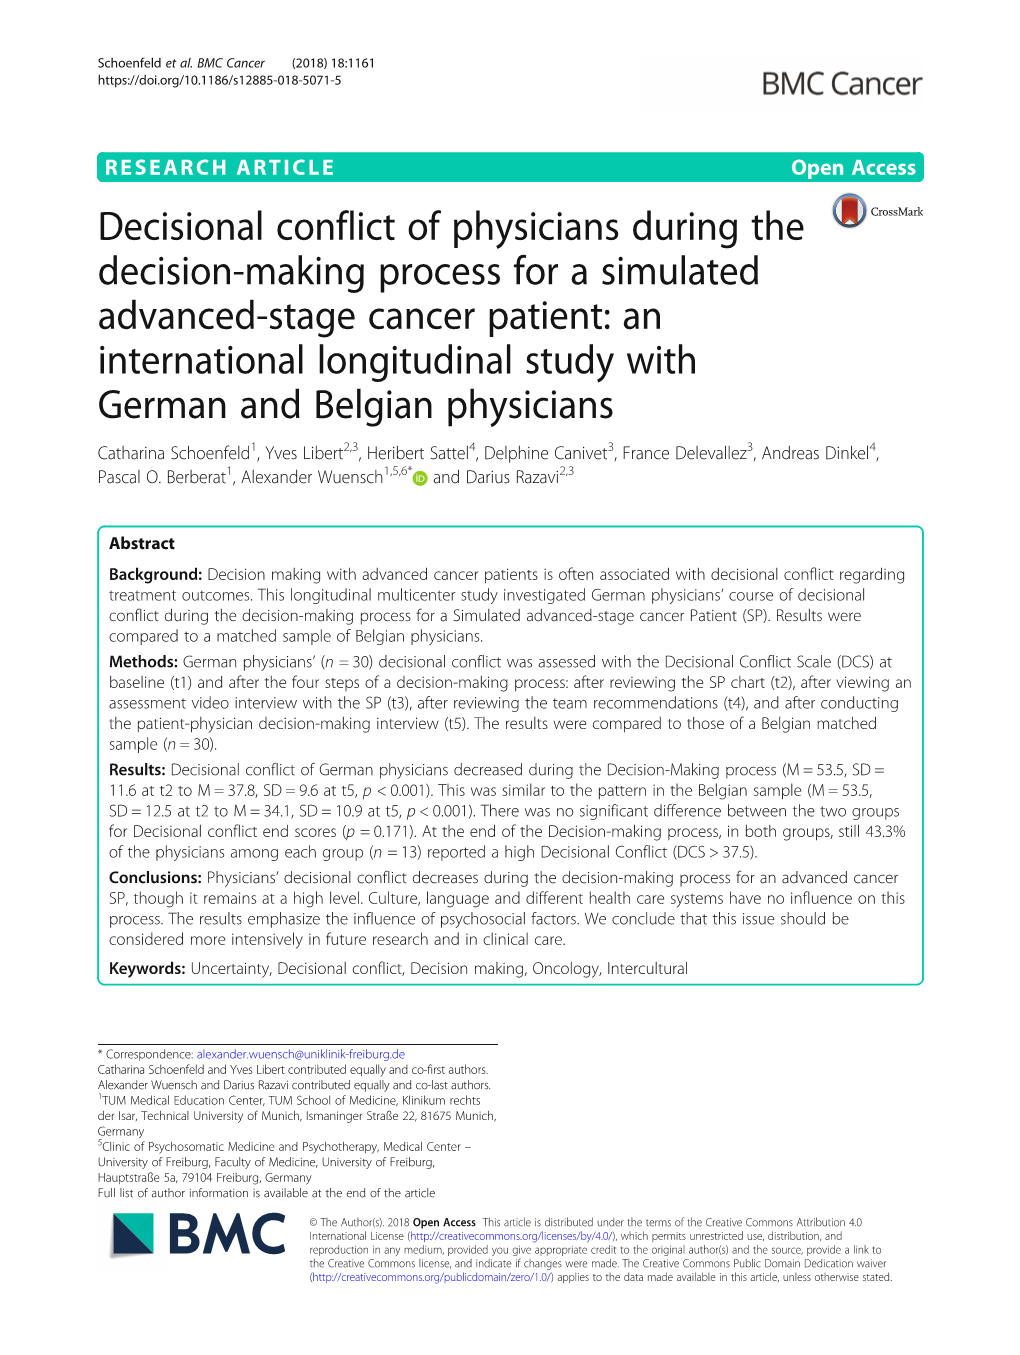 Decisional Conflict of Physicians During the Decision